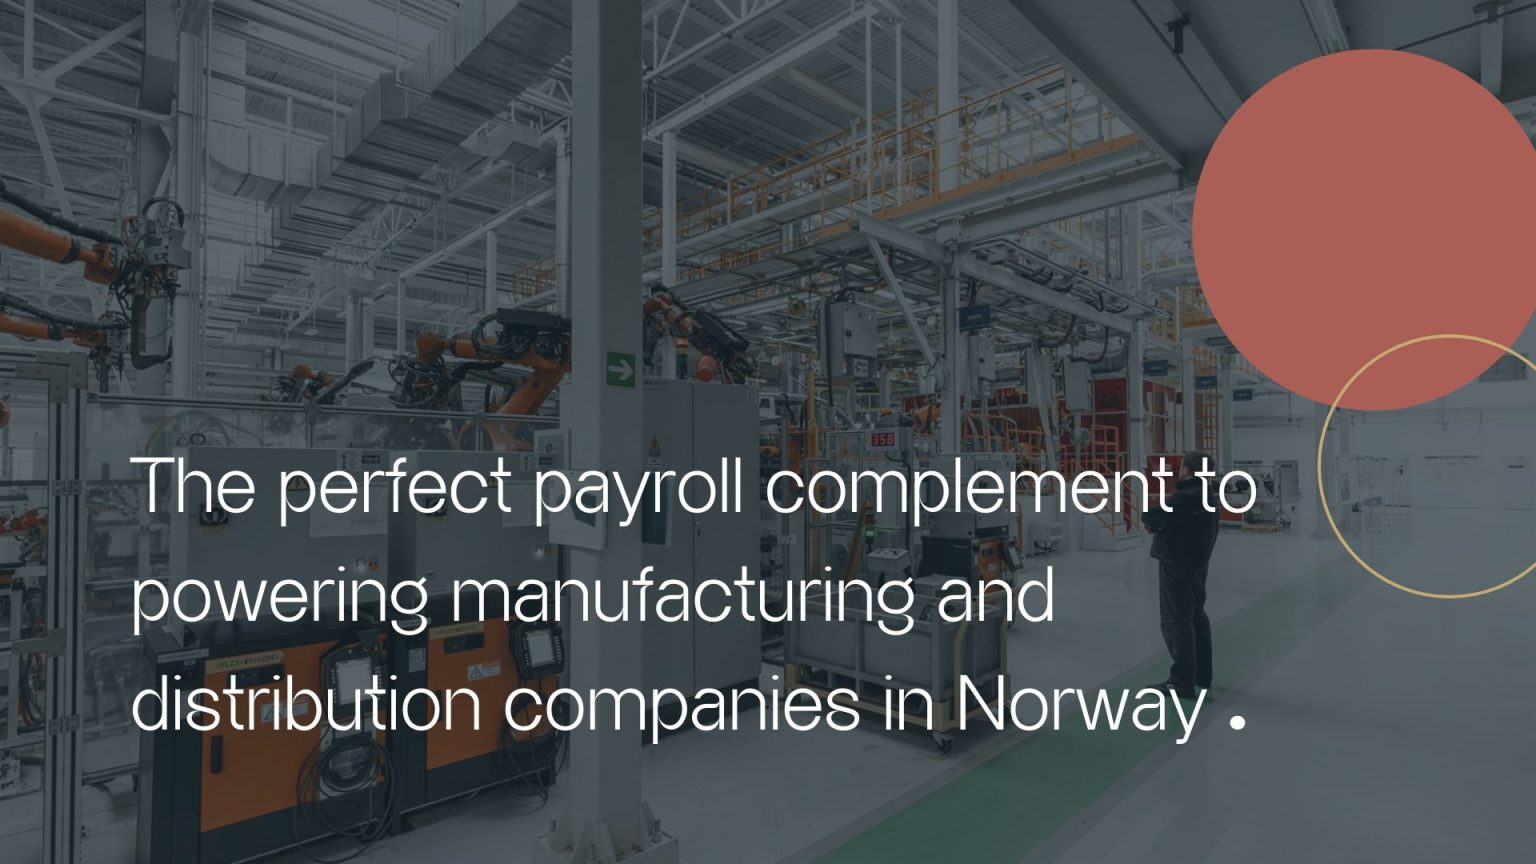 The perfect payroll complement to powering manufacturing and distribution companies in Norway NO LOGO (1)